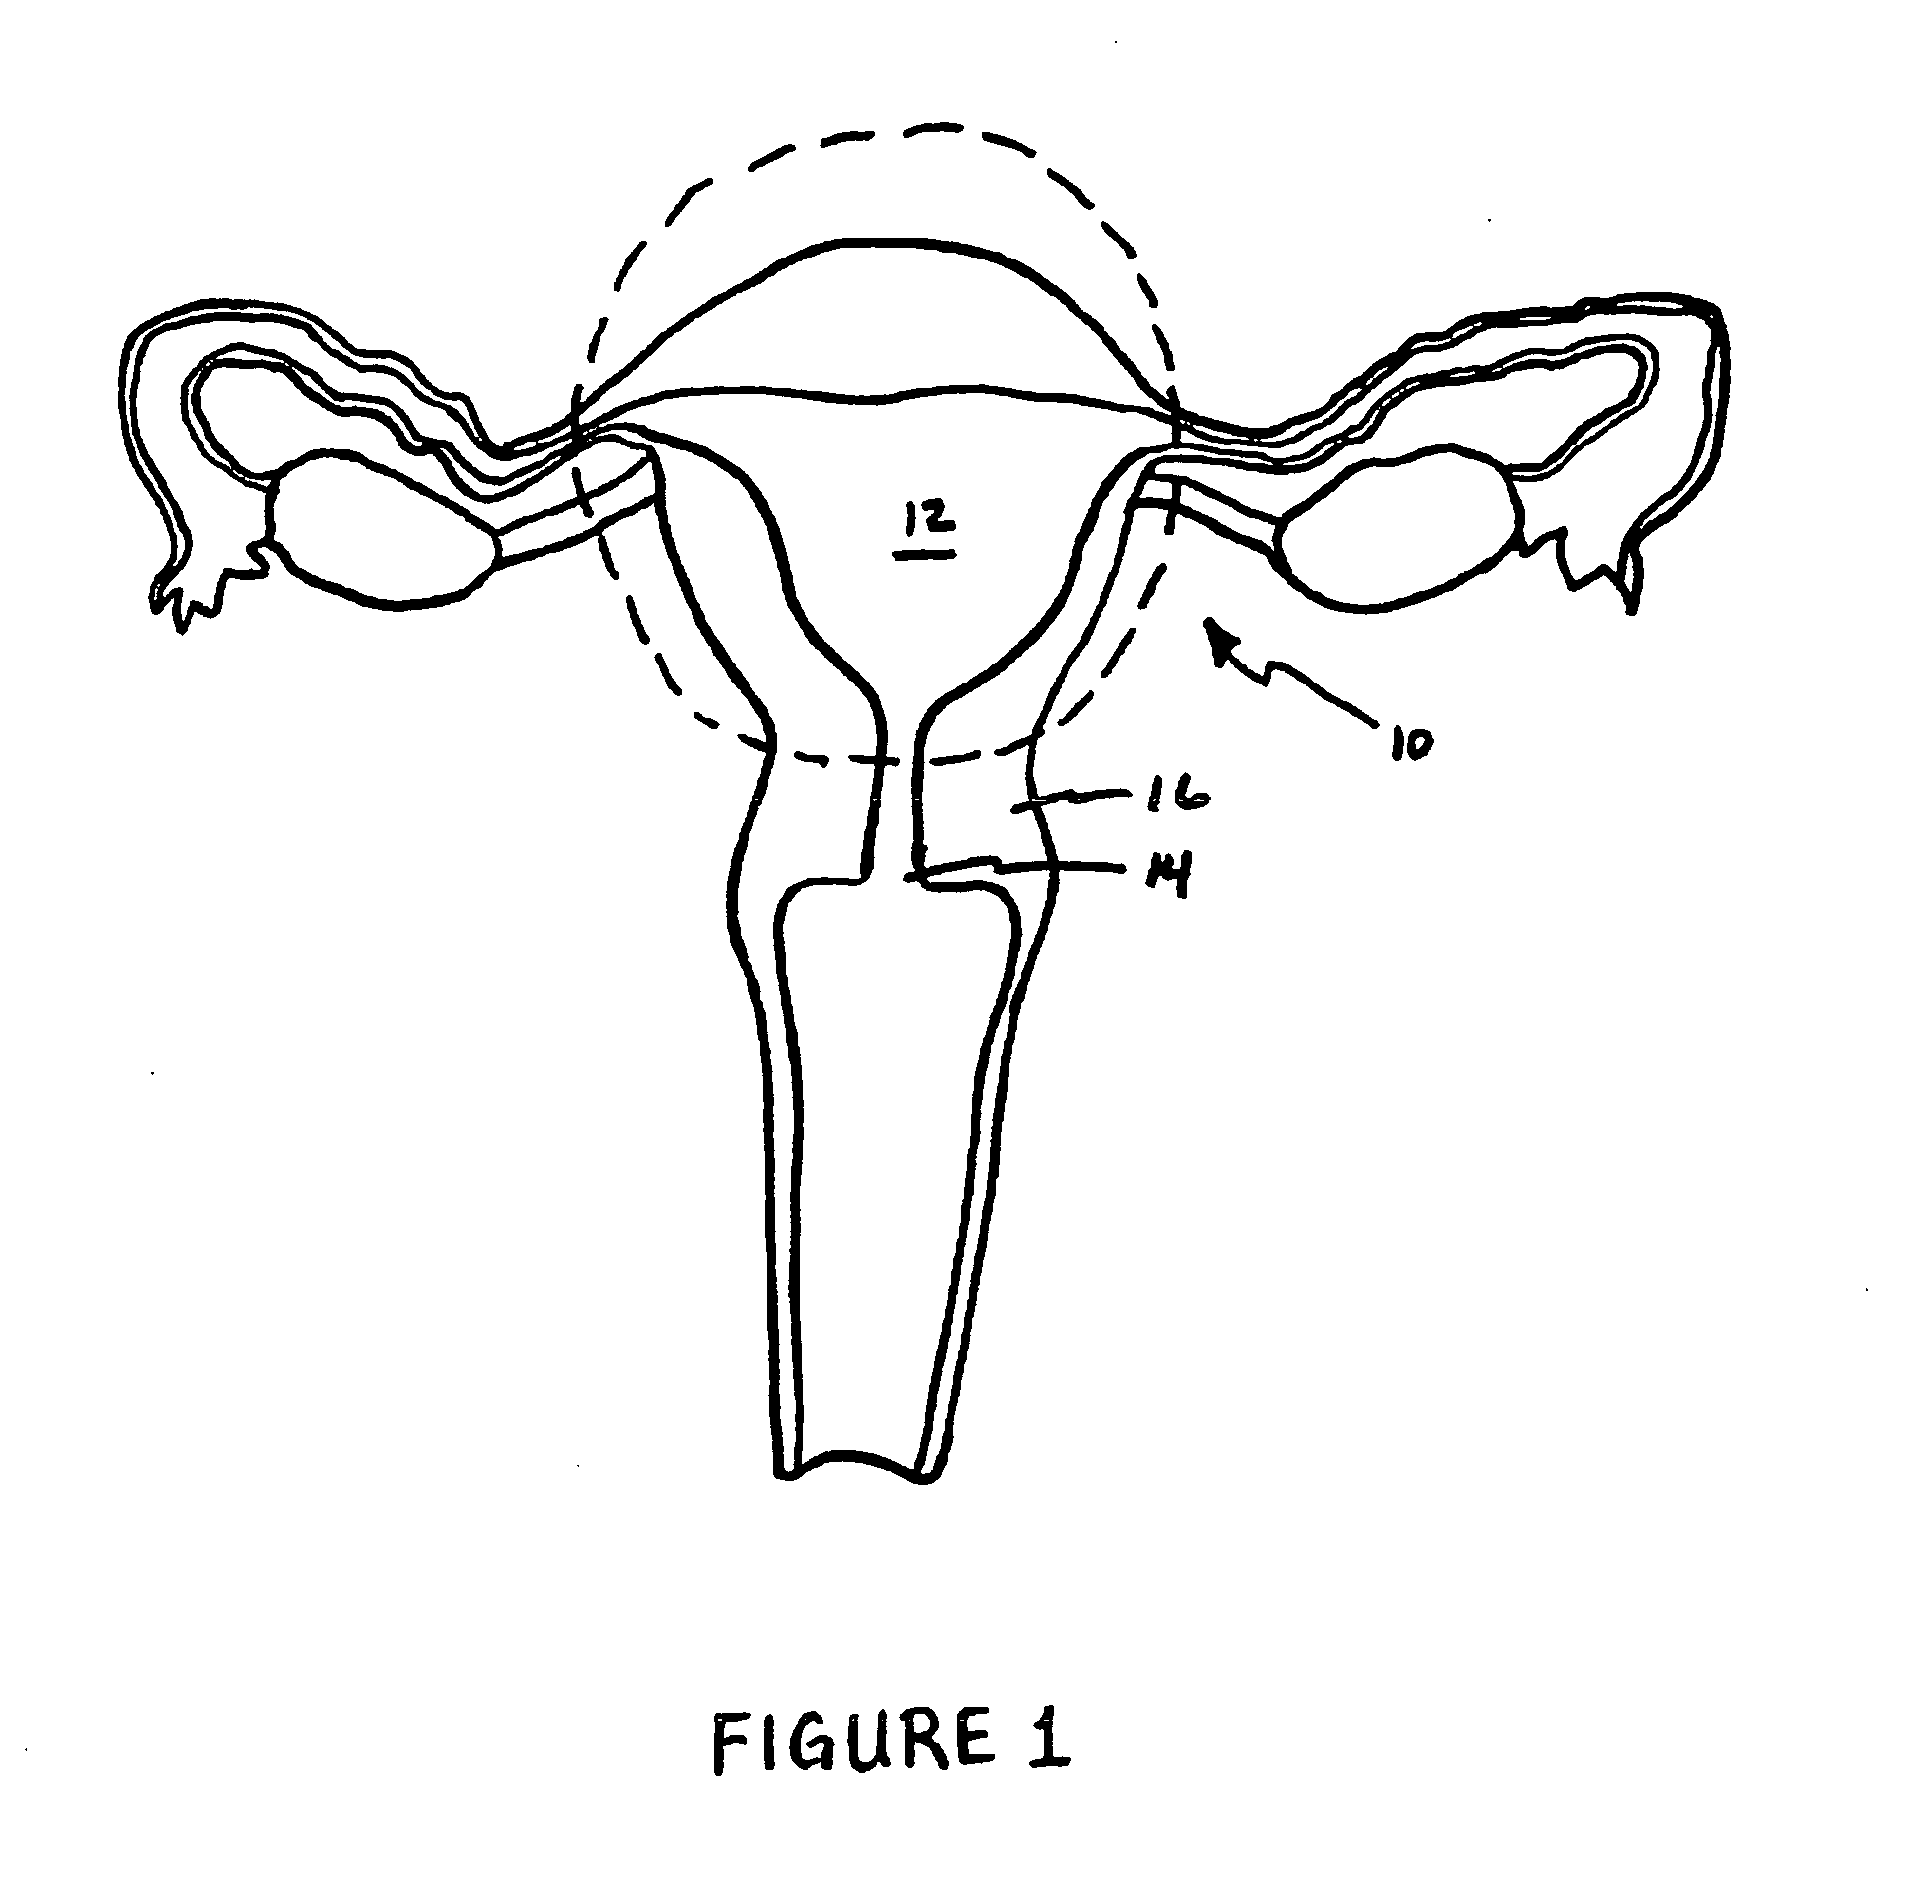 Intrauterine implant and methods of use